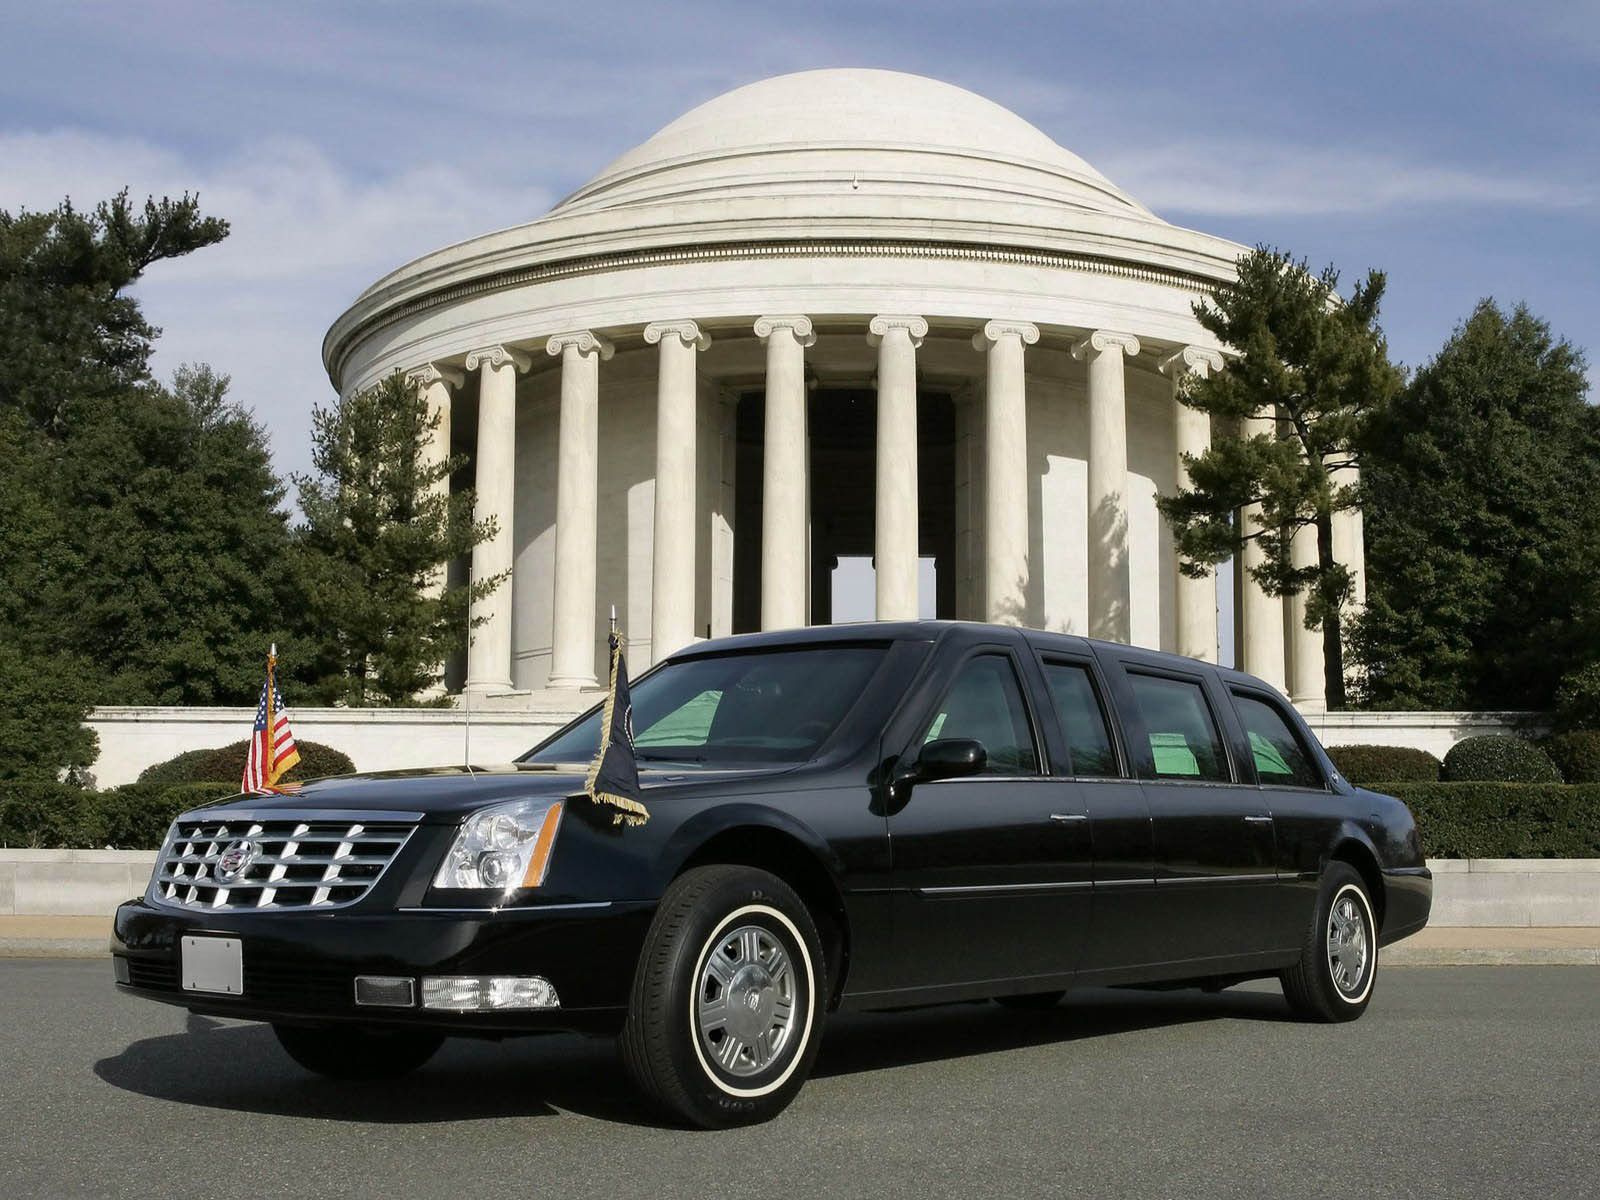 2006 Cadillac DTS Presidential Limousine